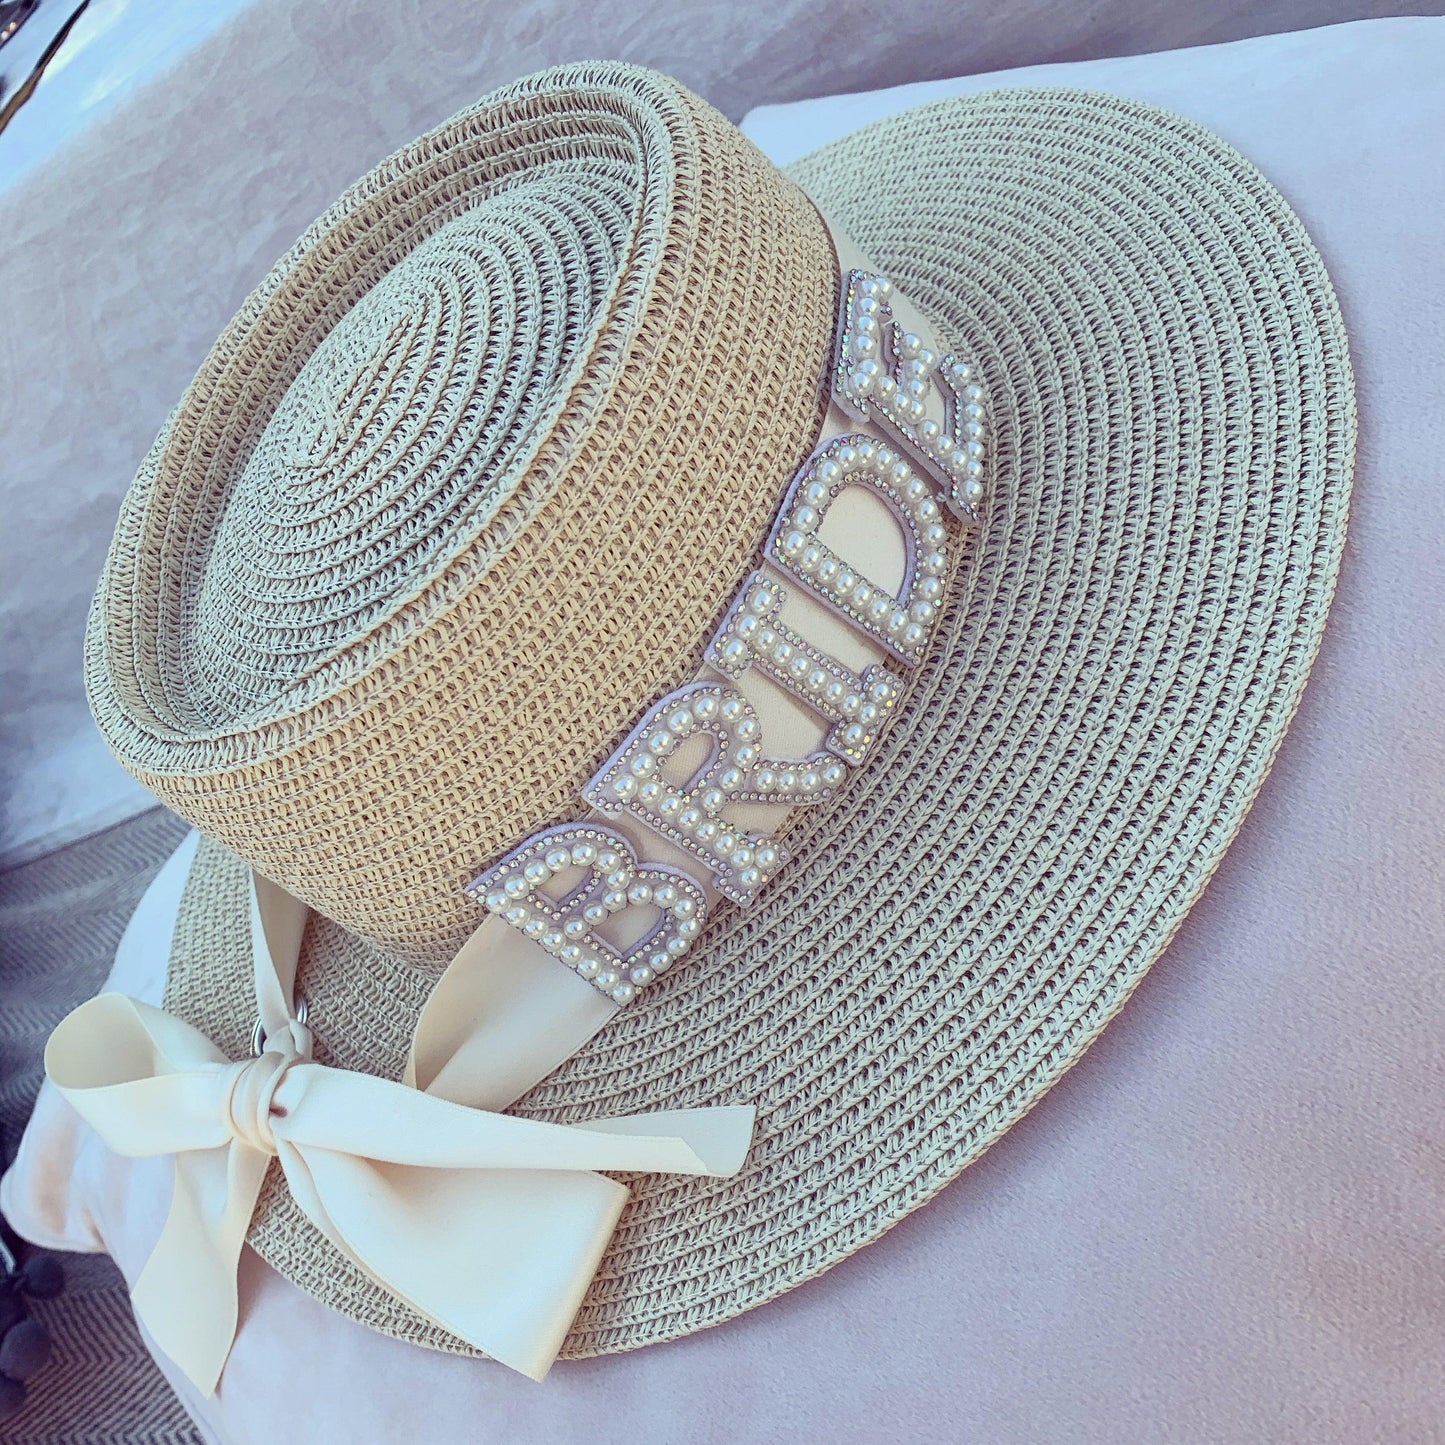 Straw bride hat with embellished pearl lettering